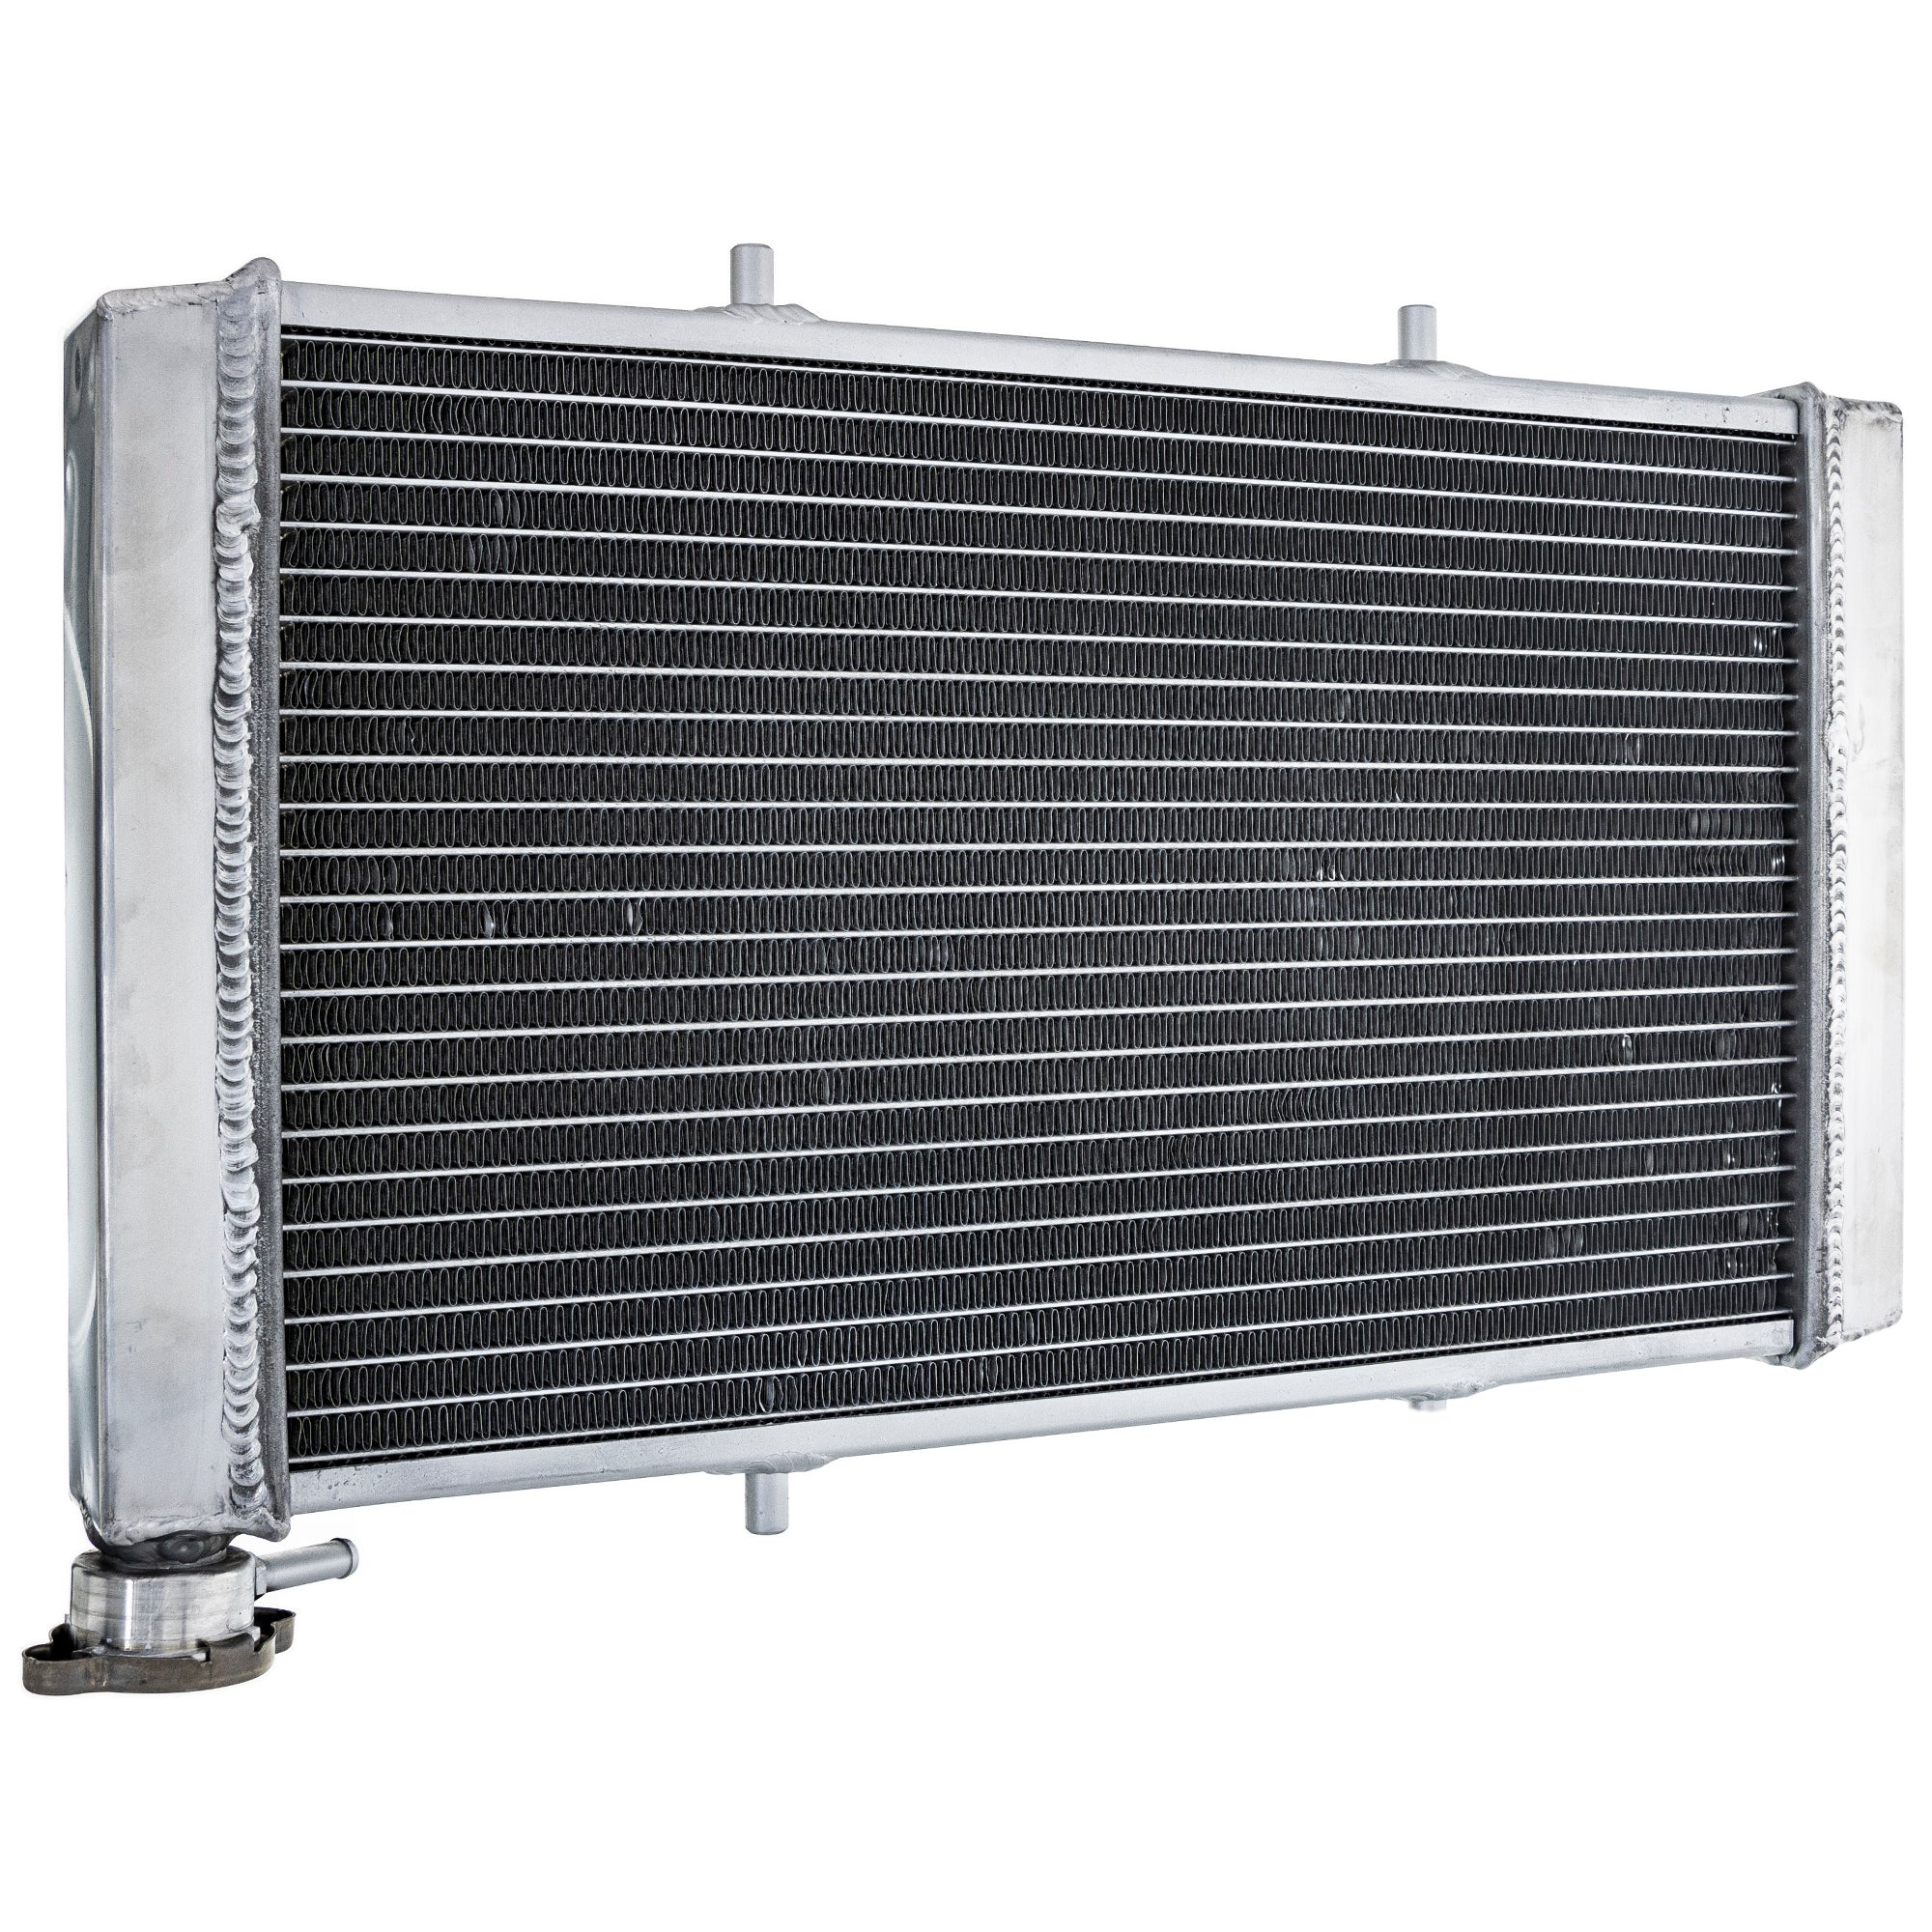 NICHE 519-CRD2221A High Capacity Radiator for zOTHER Wolverine Viking